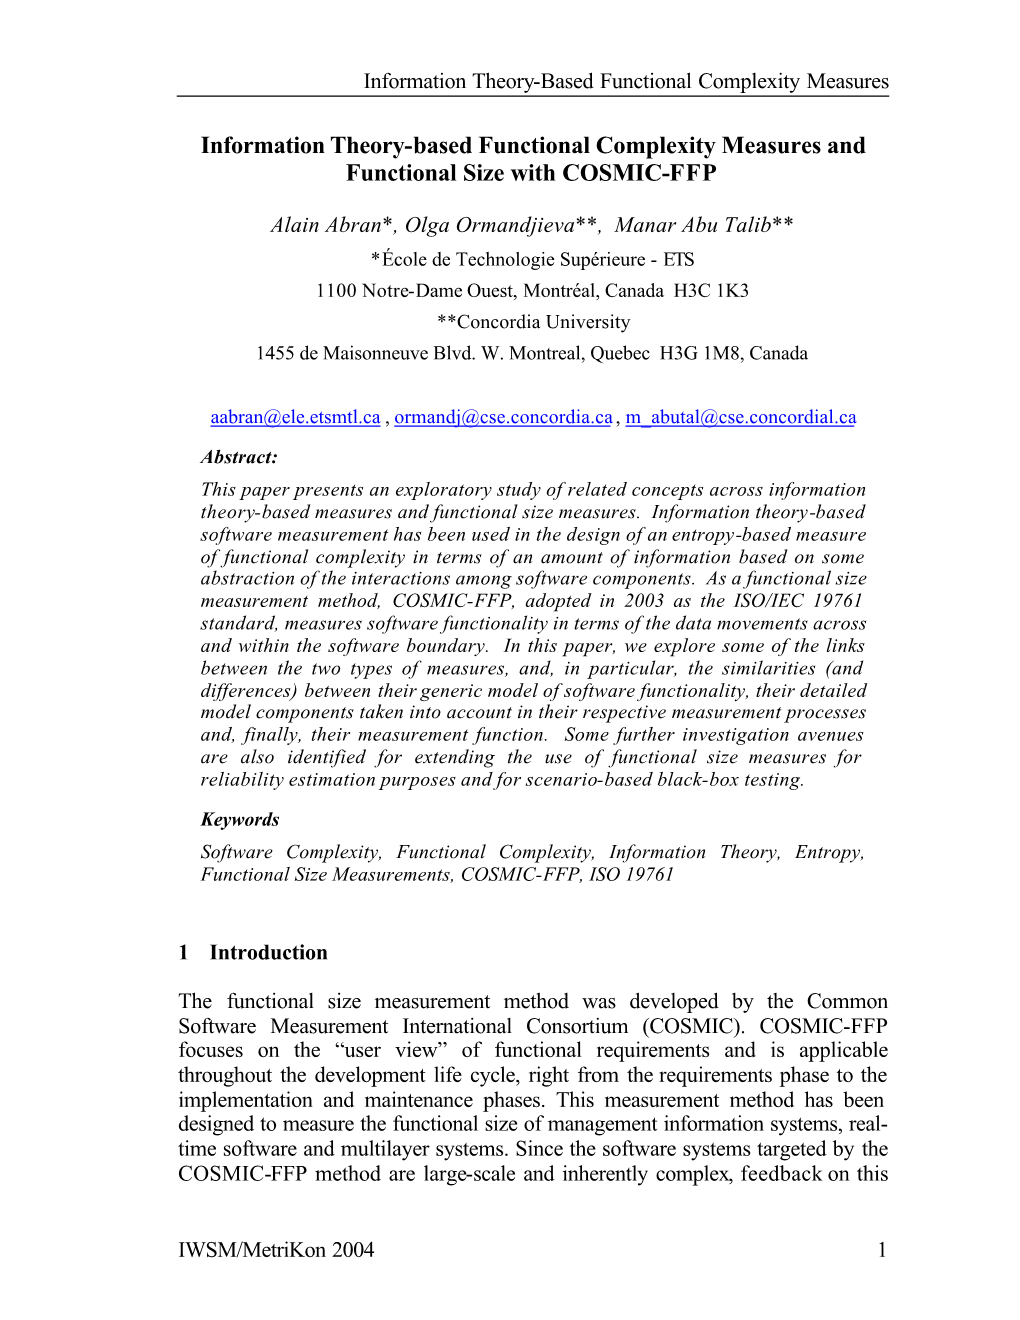 Information Theory-Based Functional Complexity Measures and Functional Size with COSMIC-FFP